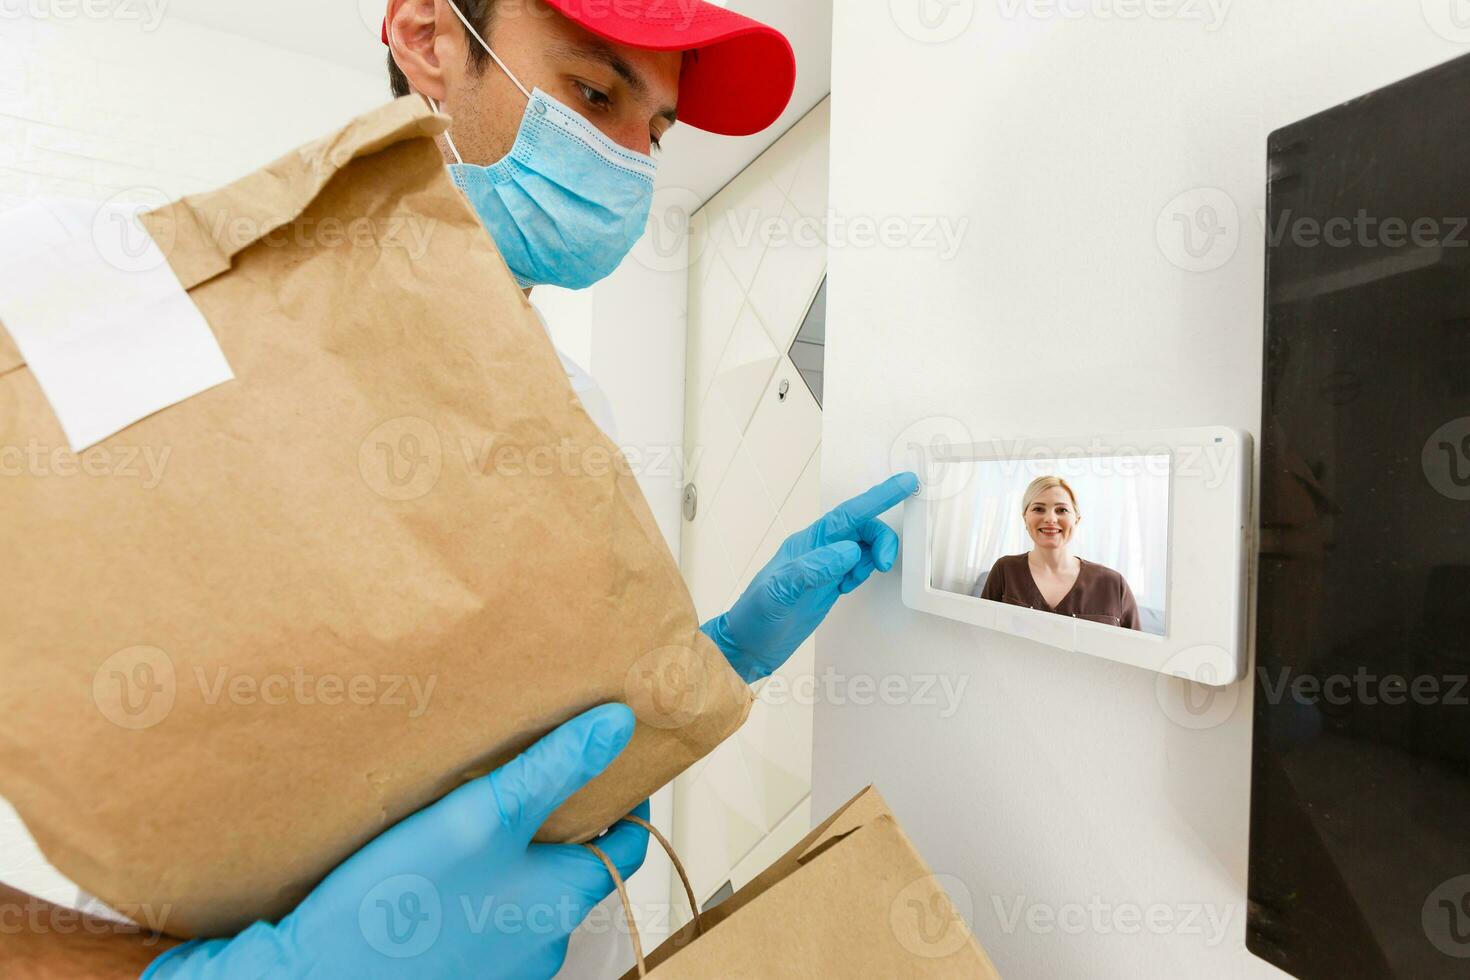 home delivery, online order. A man in uniform, a medical mask and rubber gloves with a box, a parcel in his hands. Food and food delivery during the quarantine of the coronavirus pandemic photo